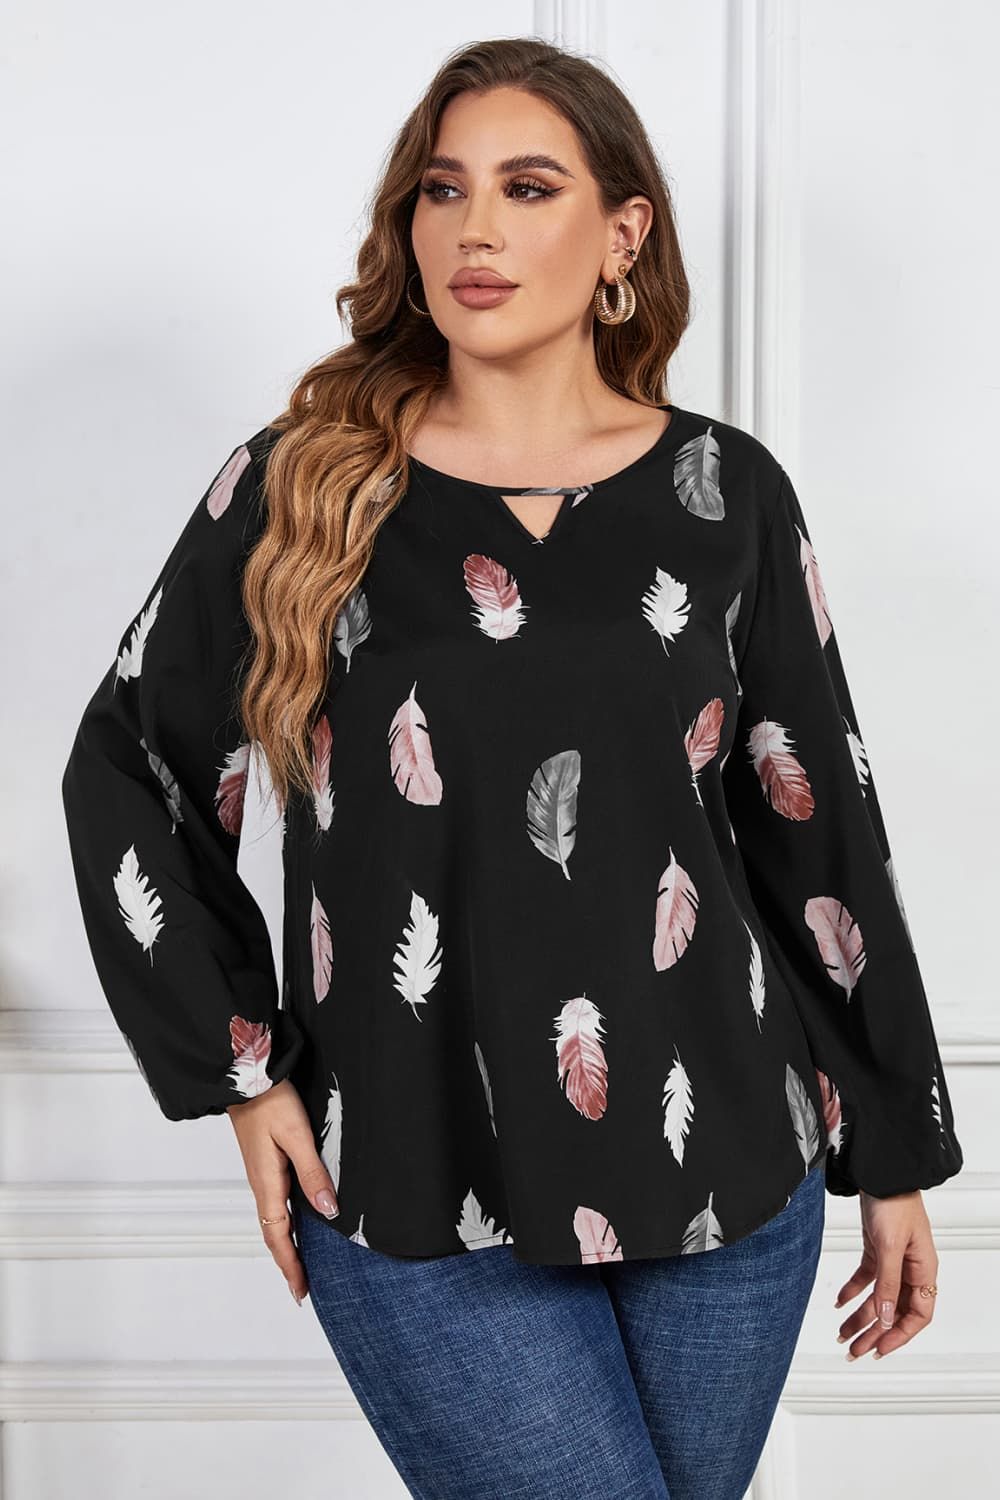 Melo Apparel Plus Size Printed Round Neck Long Sleeve Cutout Blouse.